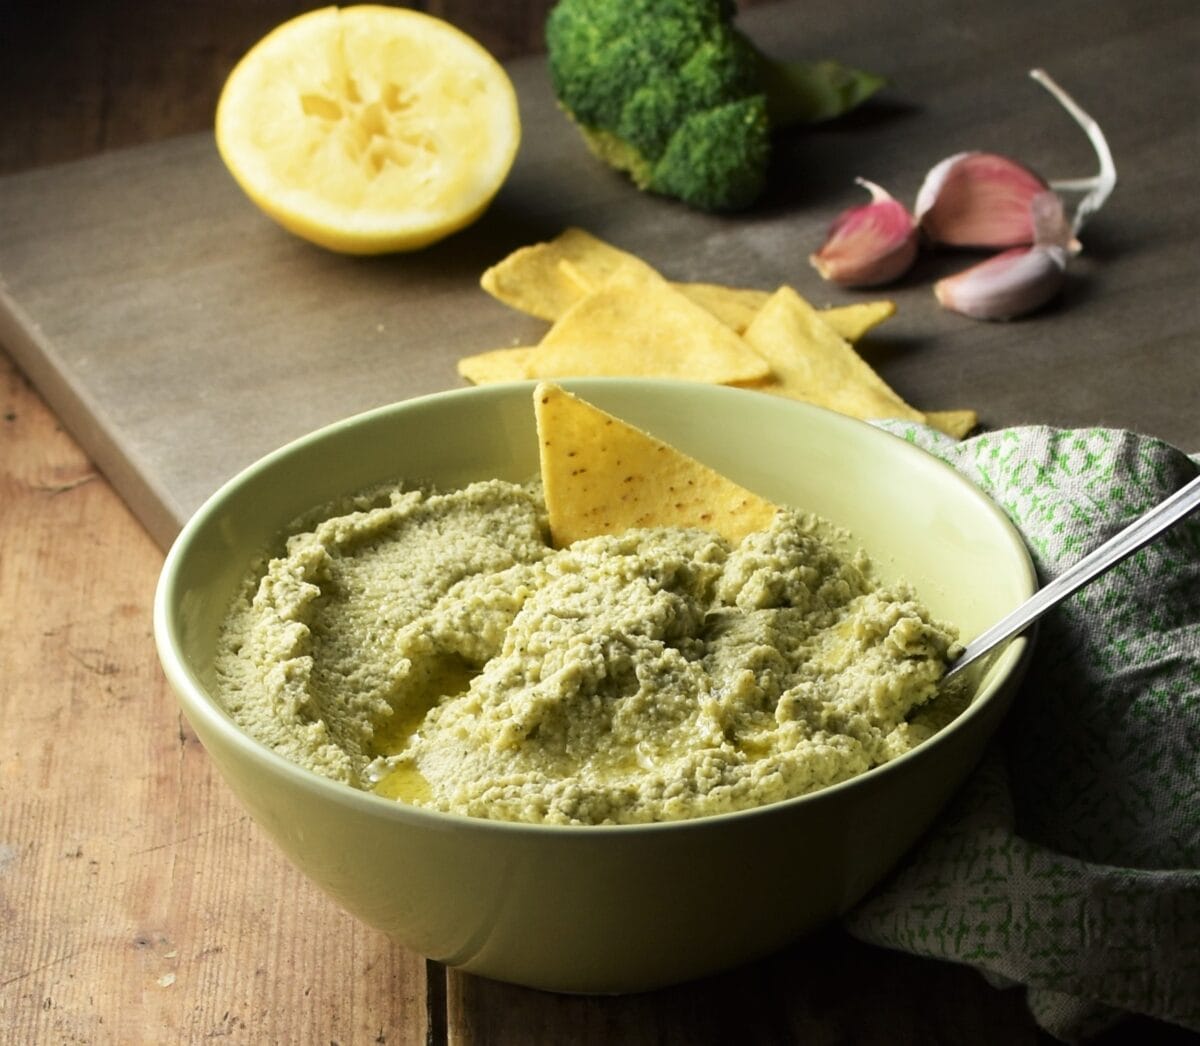 Broccoli dip in green bowl with spoon, nachos, lemon, broccoli and garlic in background.